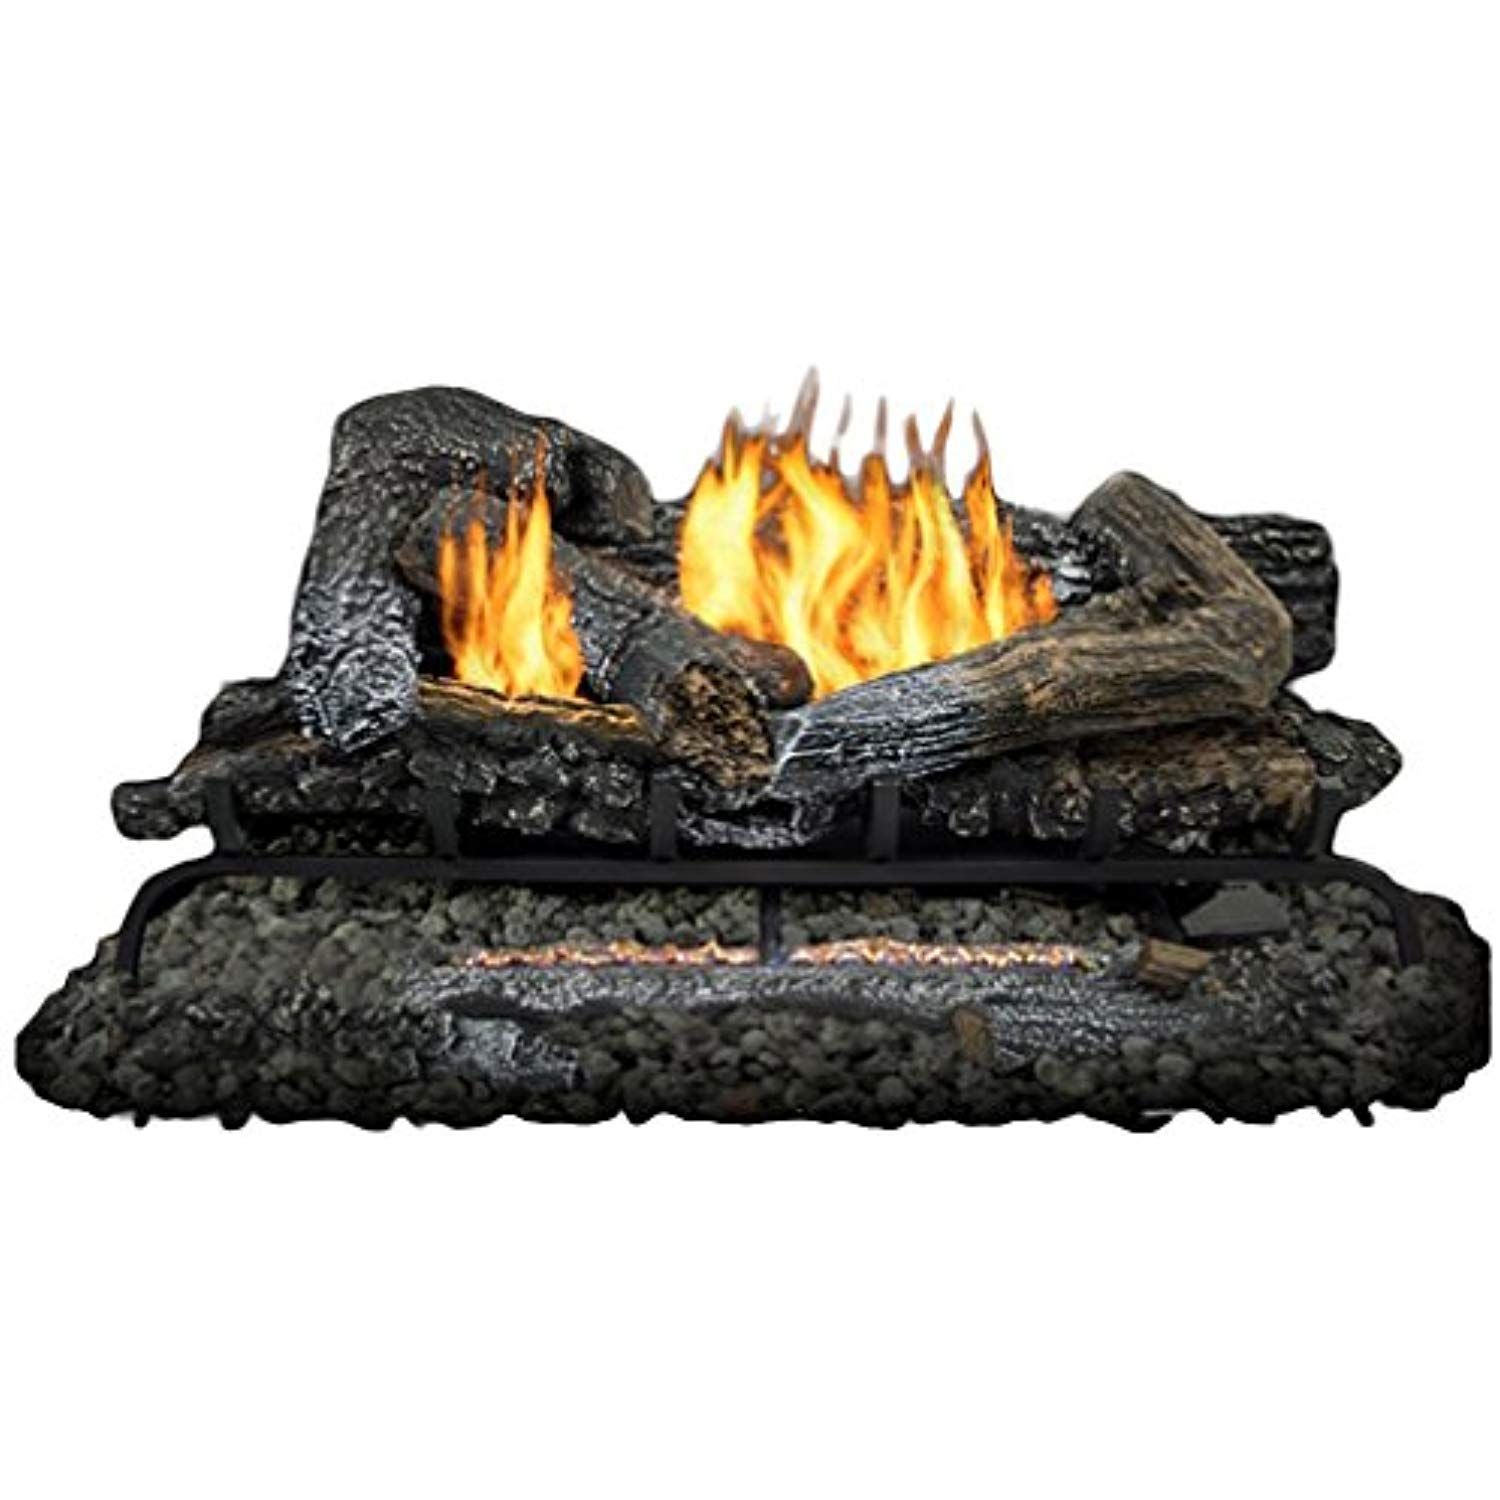 Propane Fireplace Logs Ventless Luxury Kozy World Gld3070r Vented Gas Log Set 30" Want to Know